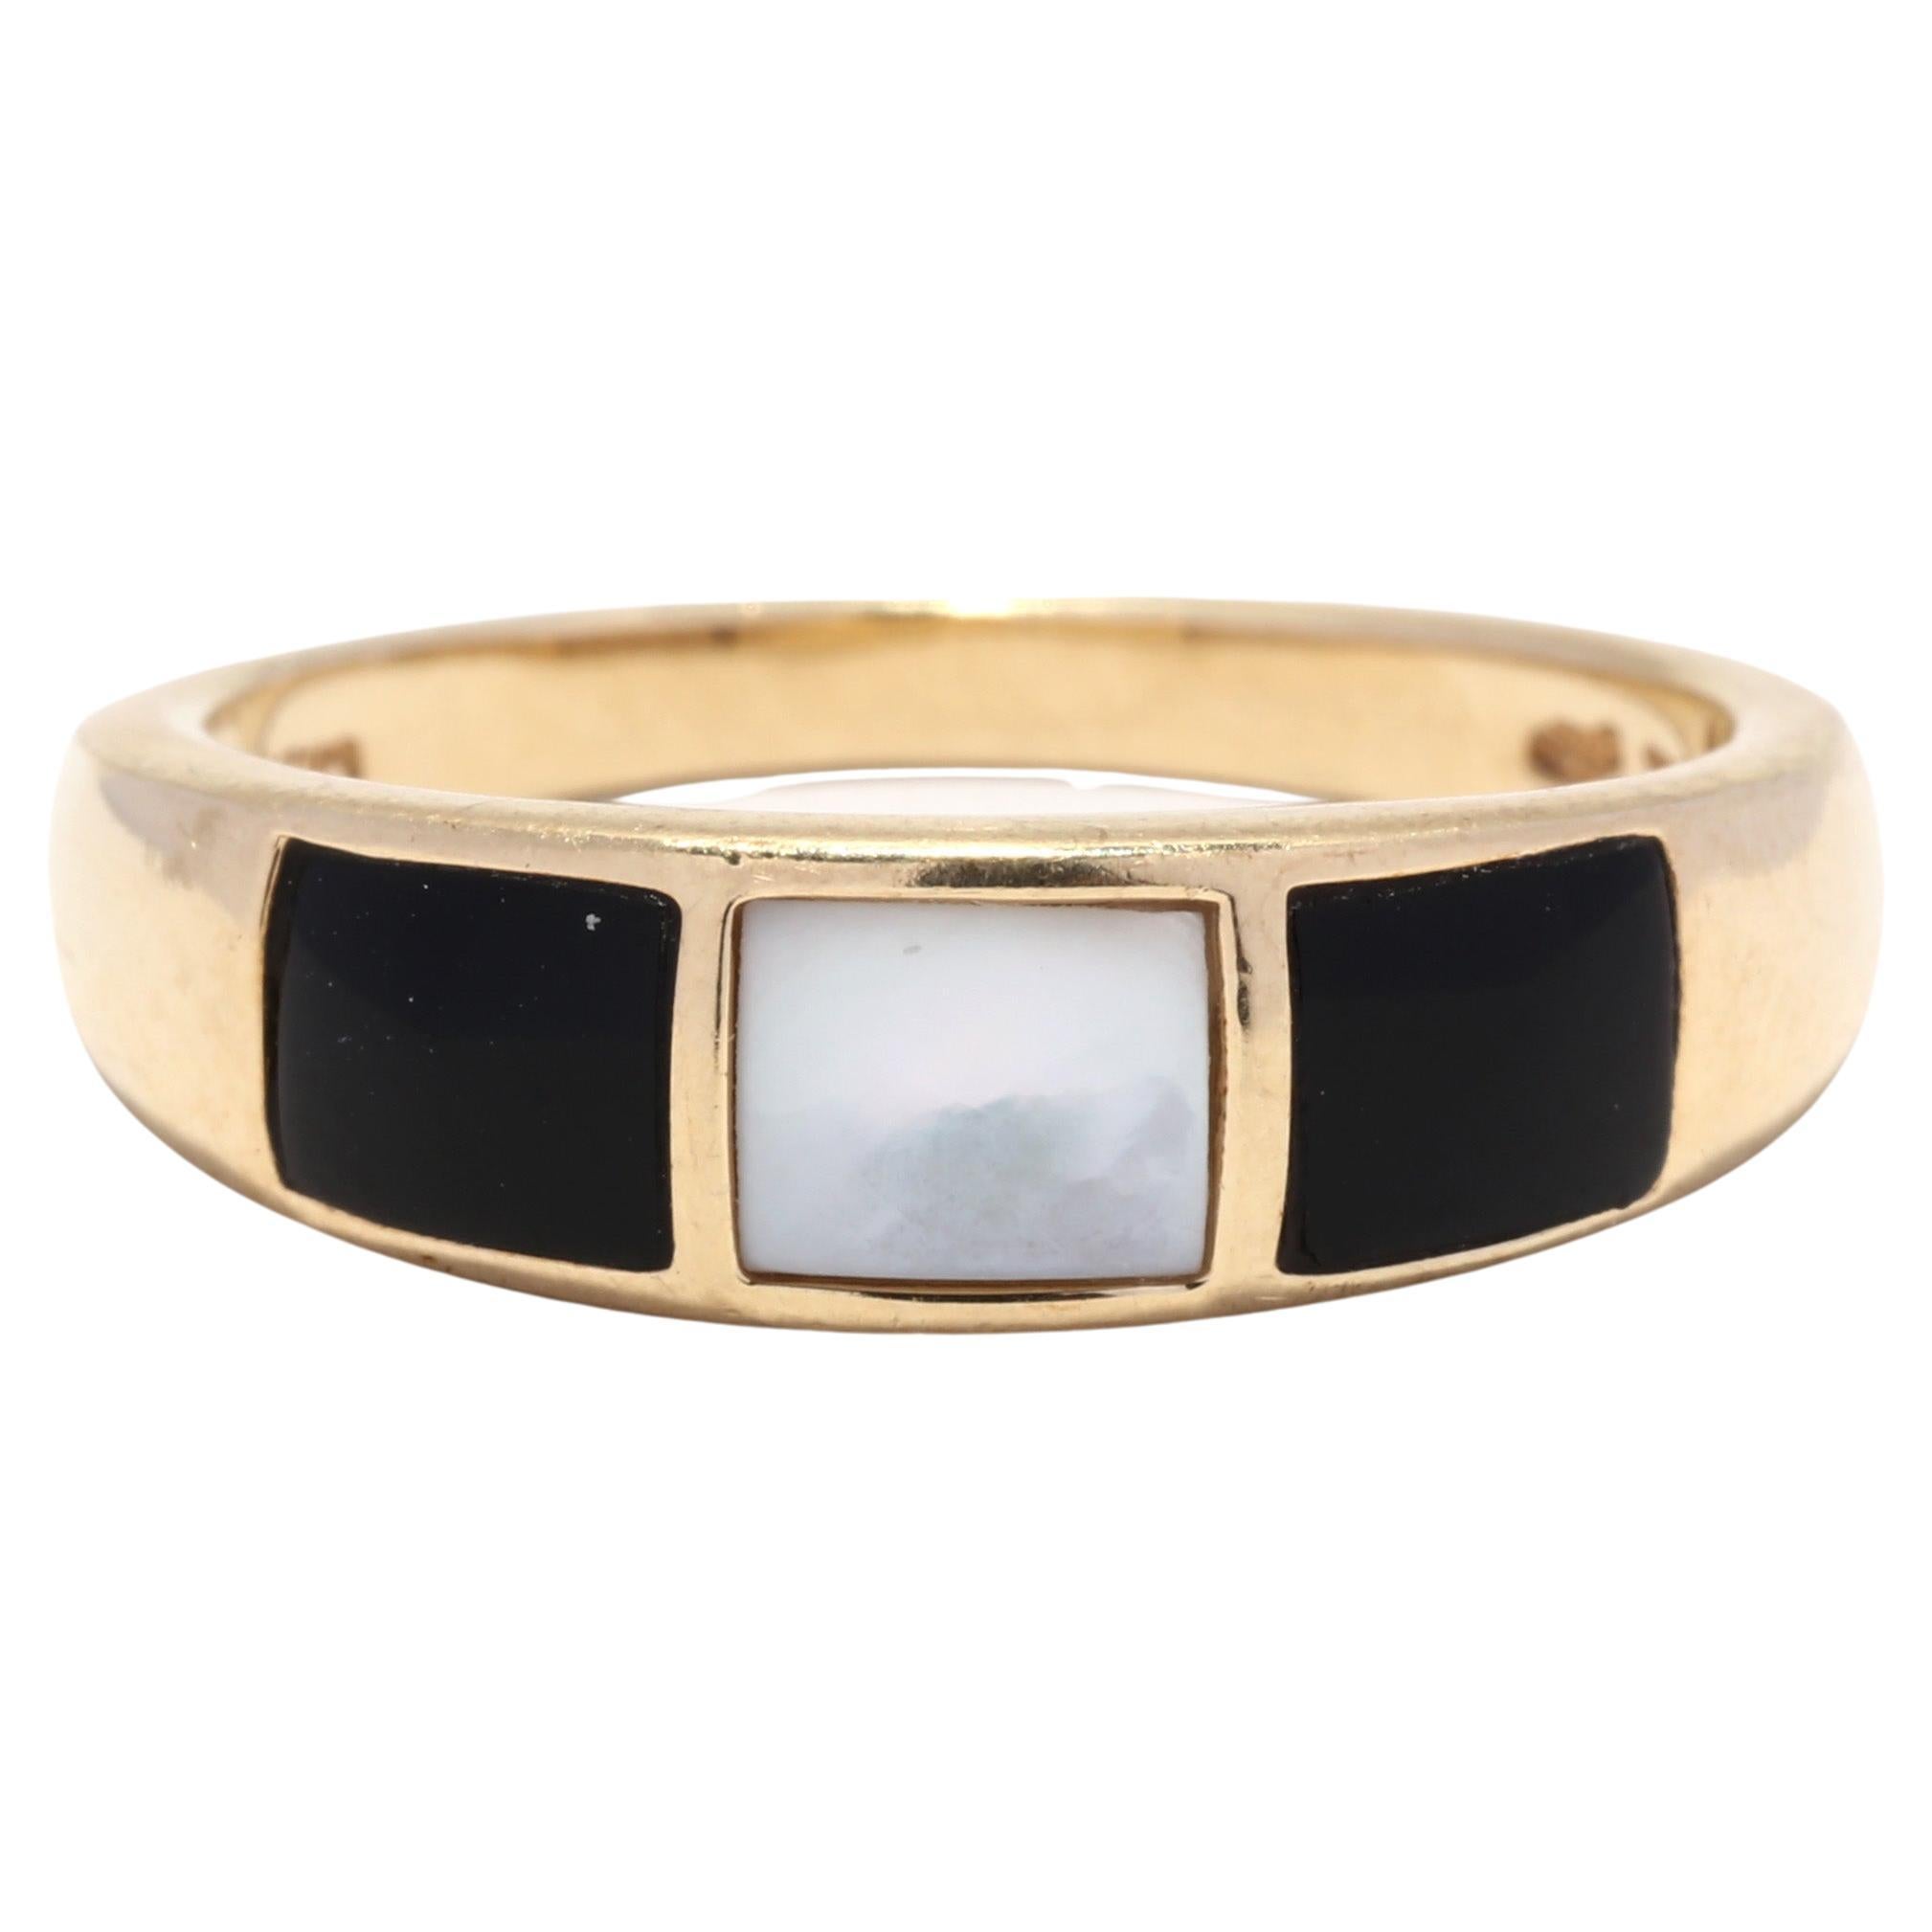 Vintage 14KT Yellow Gold Black Onyx Mother of Pearl Ring, Black 